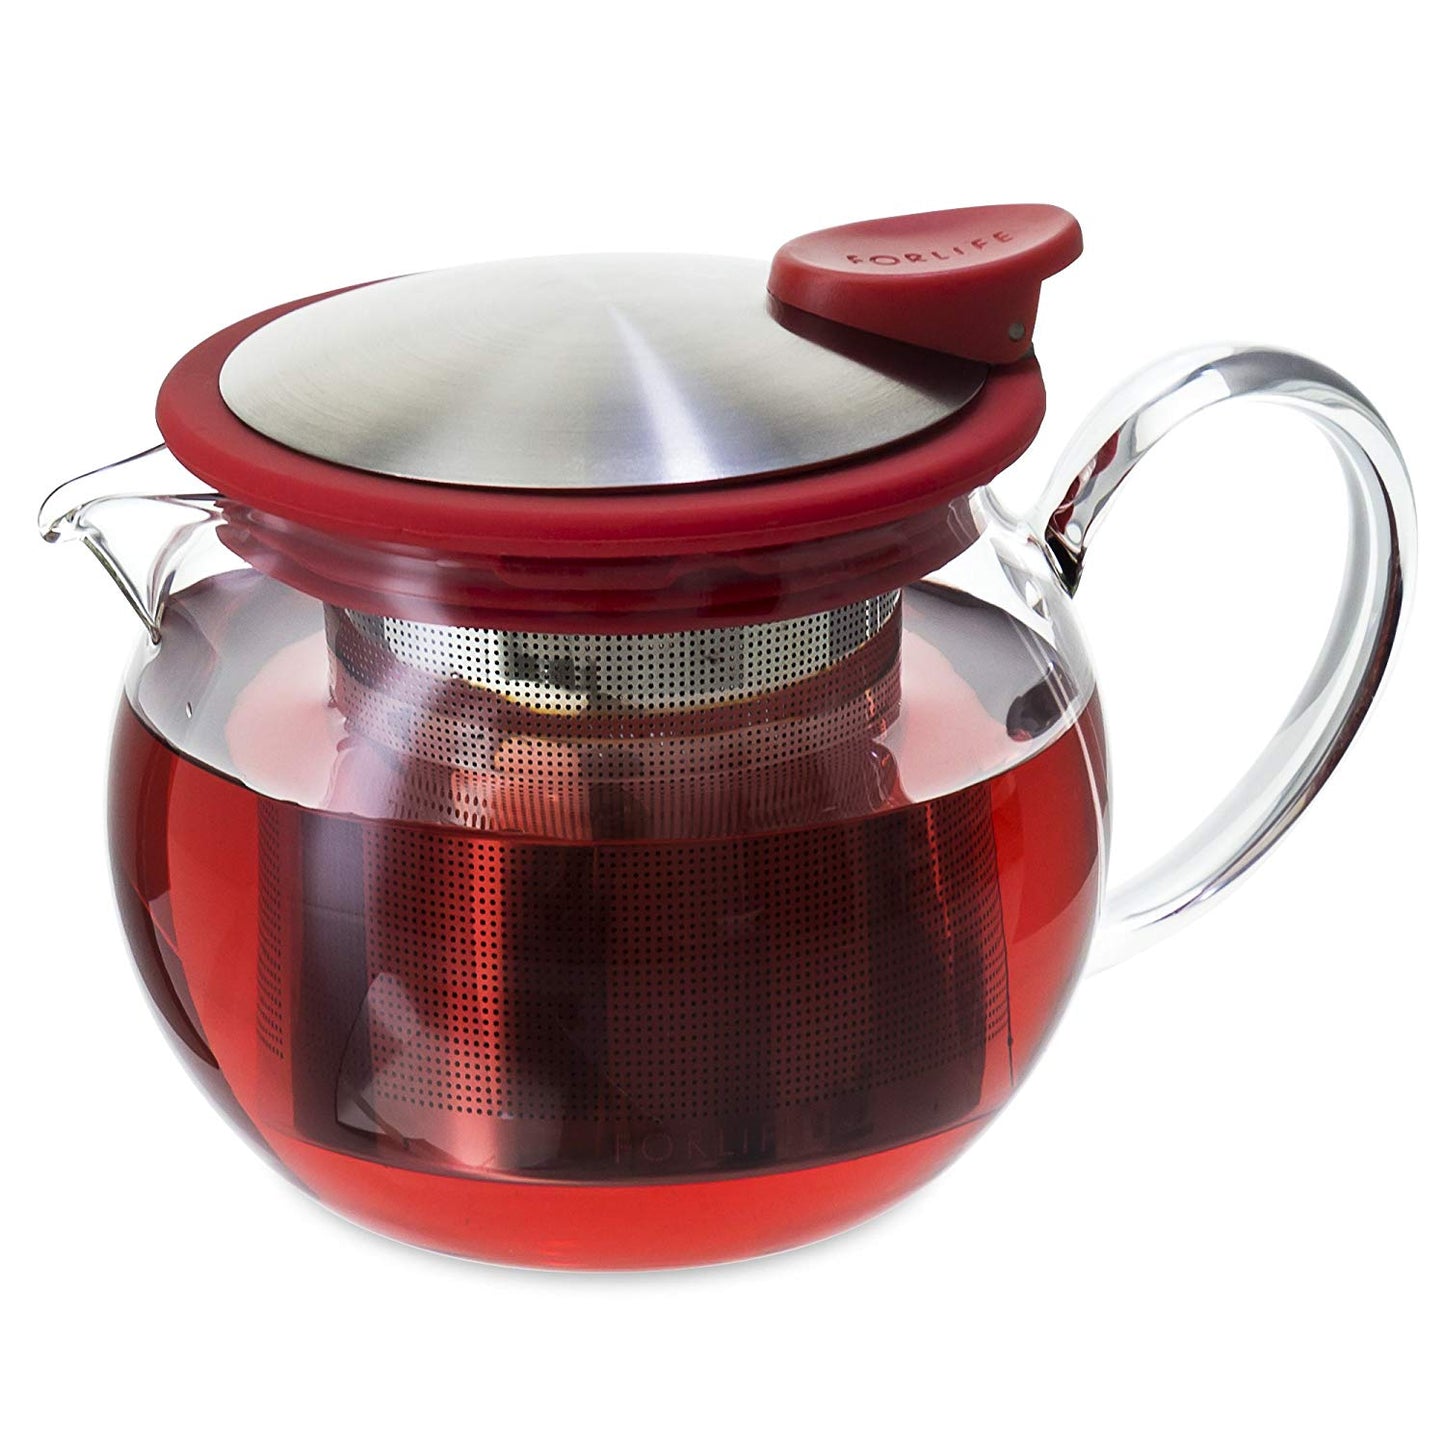 Bola Glass Teapot with Basket Infuser, 15-Ounce/444ml, Red